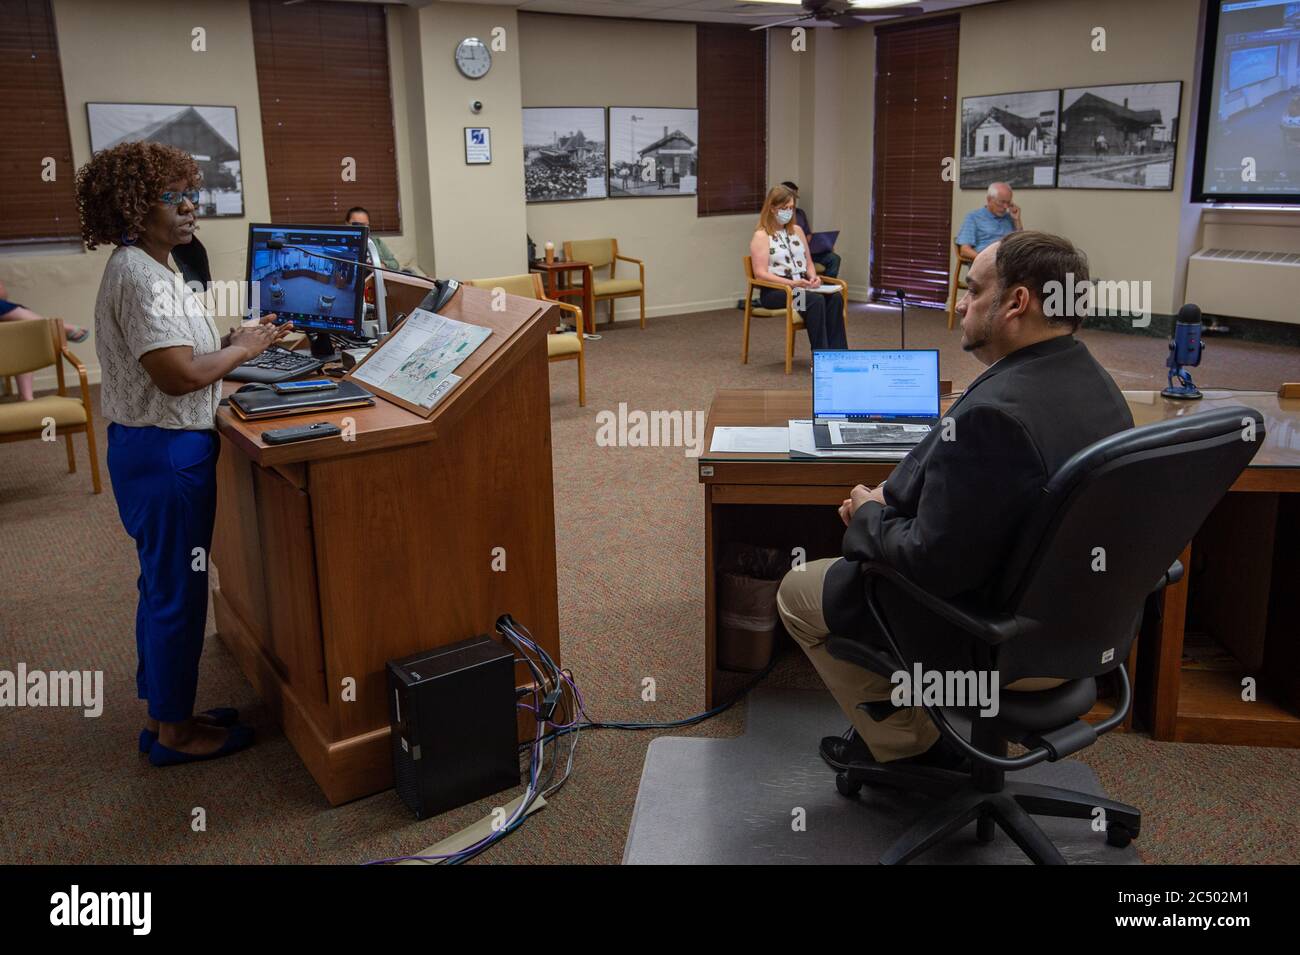 Manhattan, Kansas, USA. 29th June, 2020. TERESA RYNAI PARKS, left, speaks to the Riley County Commission on Monday. PARKS, and other community members addressed the commission regarding community masking and racial tensions within the county. Credit: Luke Townsend/ZUMA Wire/Alamy Live News Stock Photo